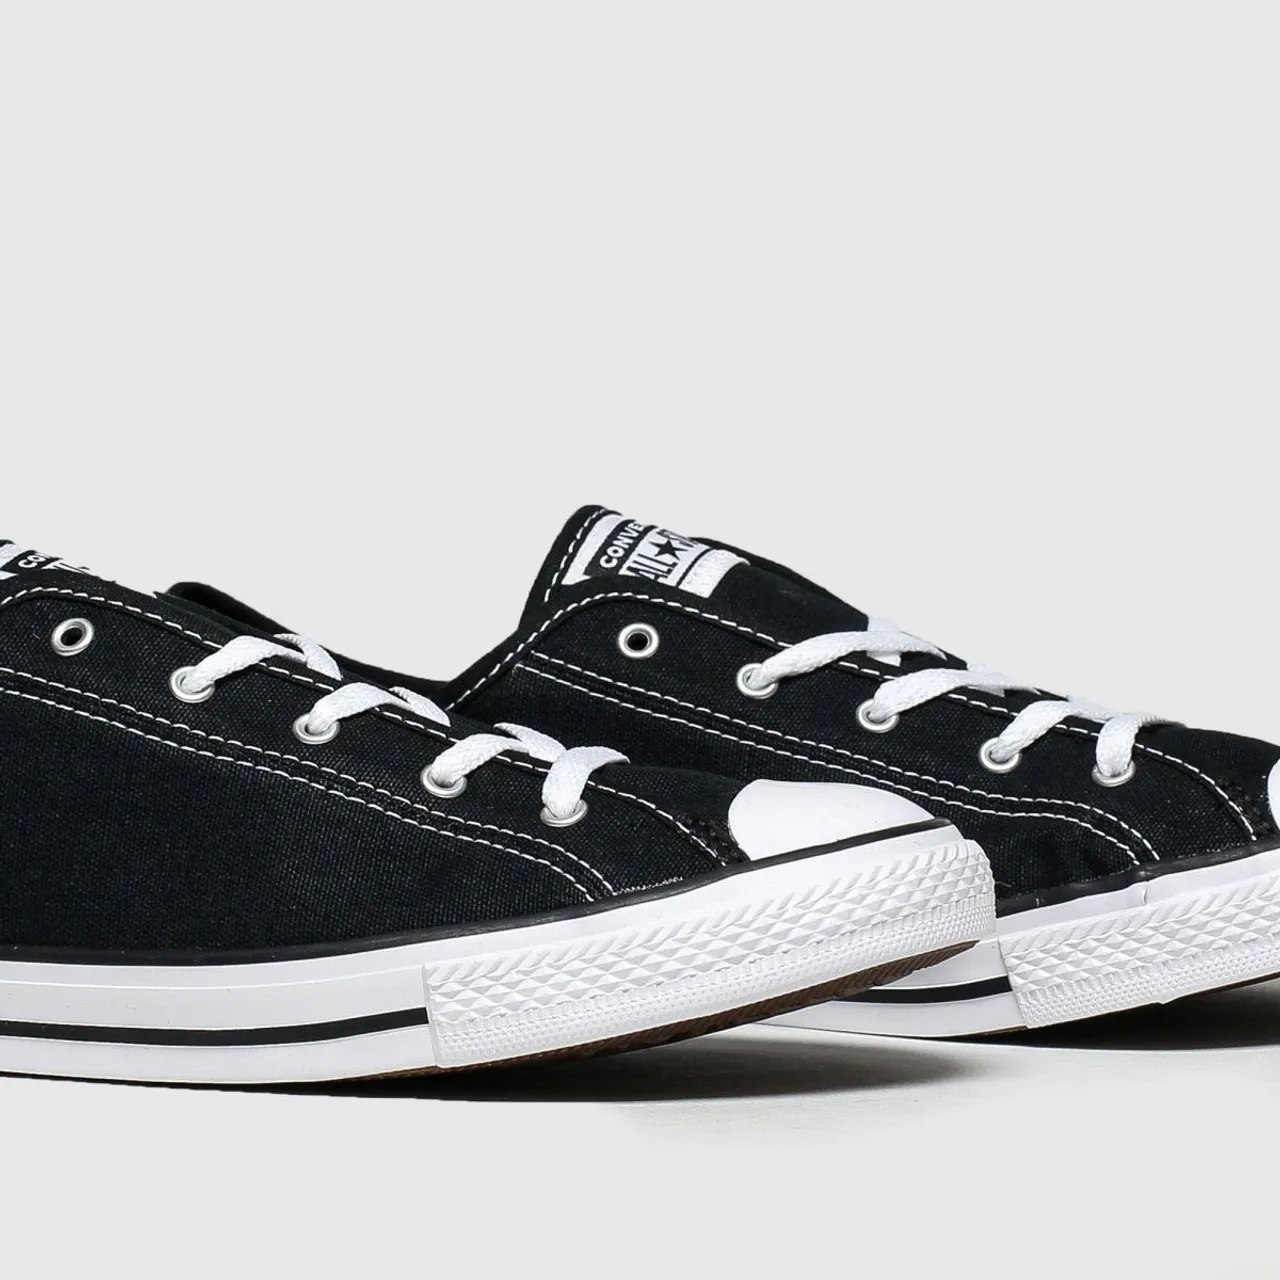 Converse All Star Dainty Gs Ox Trainers In Black & White